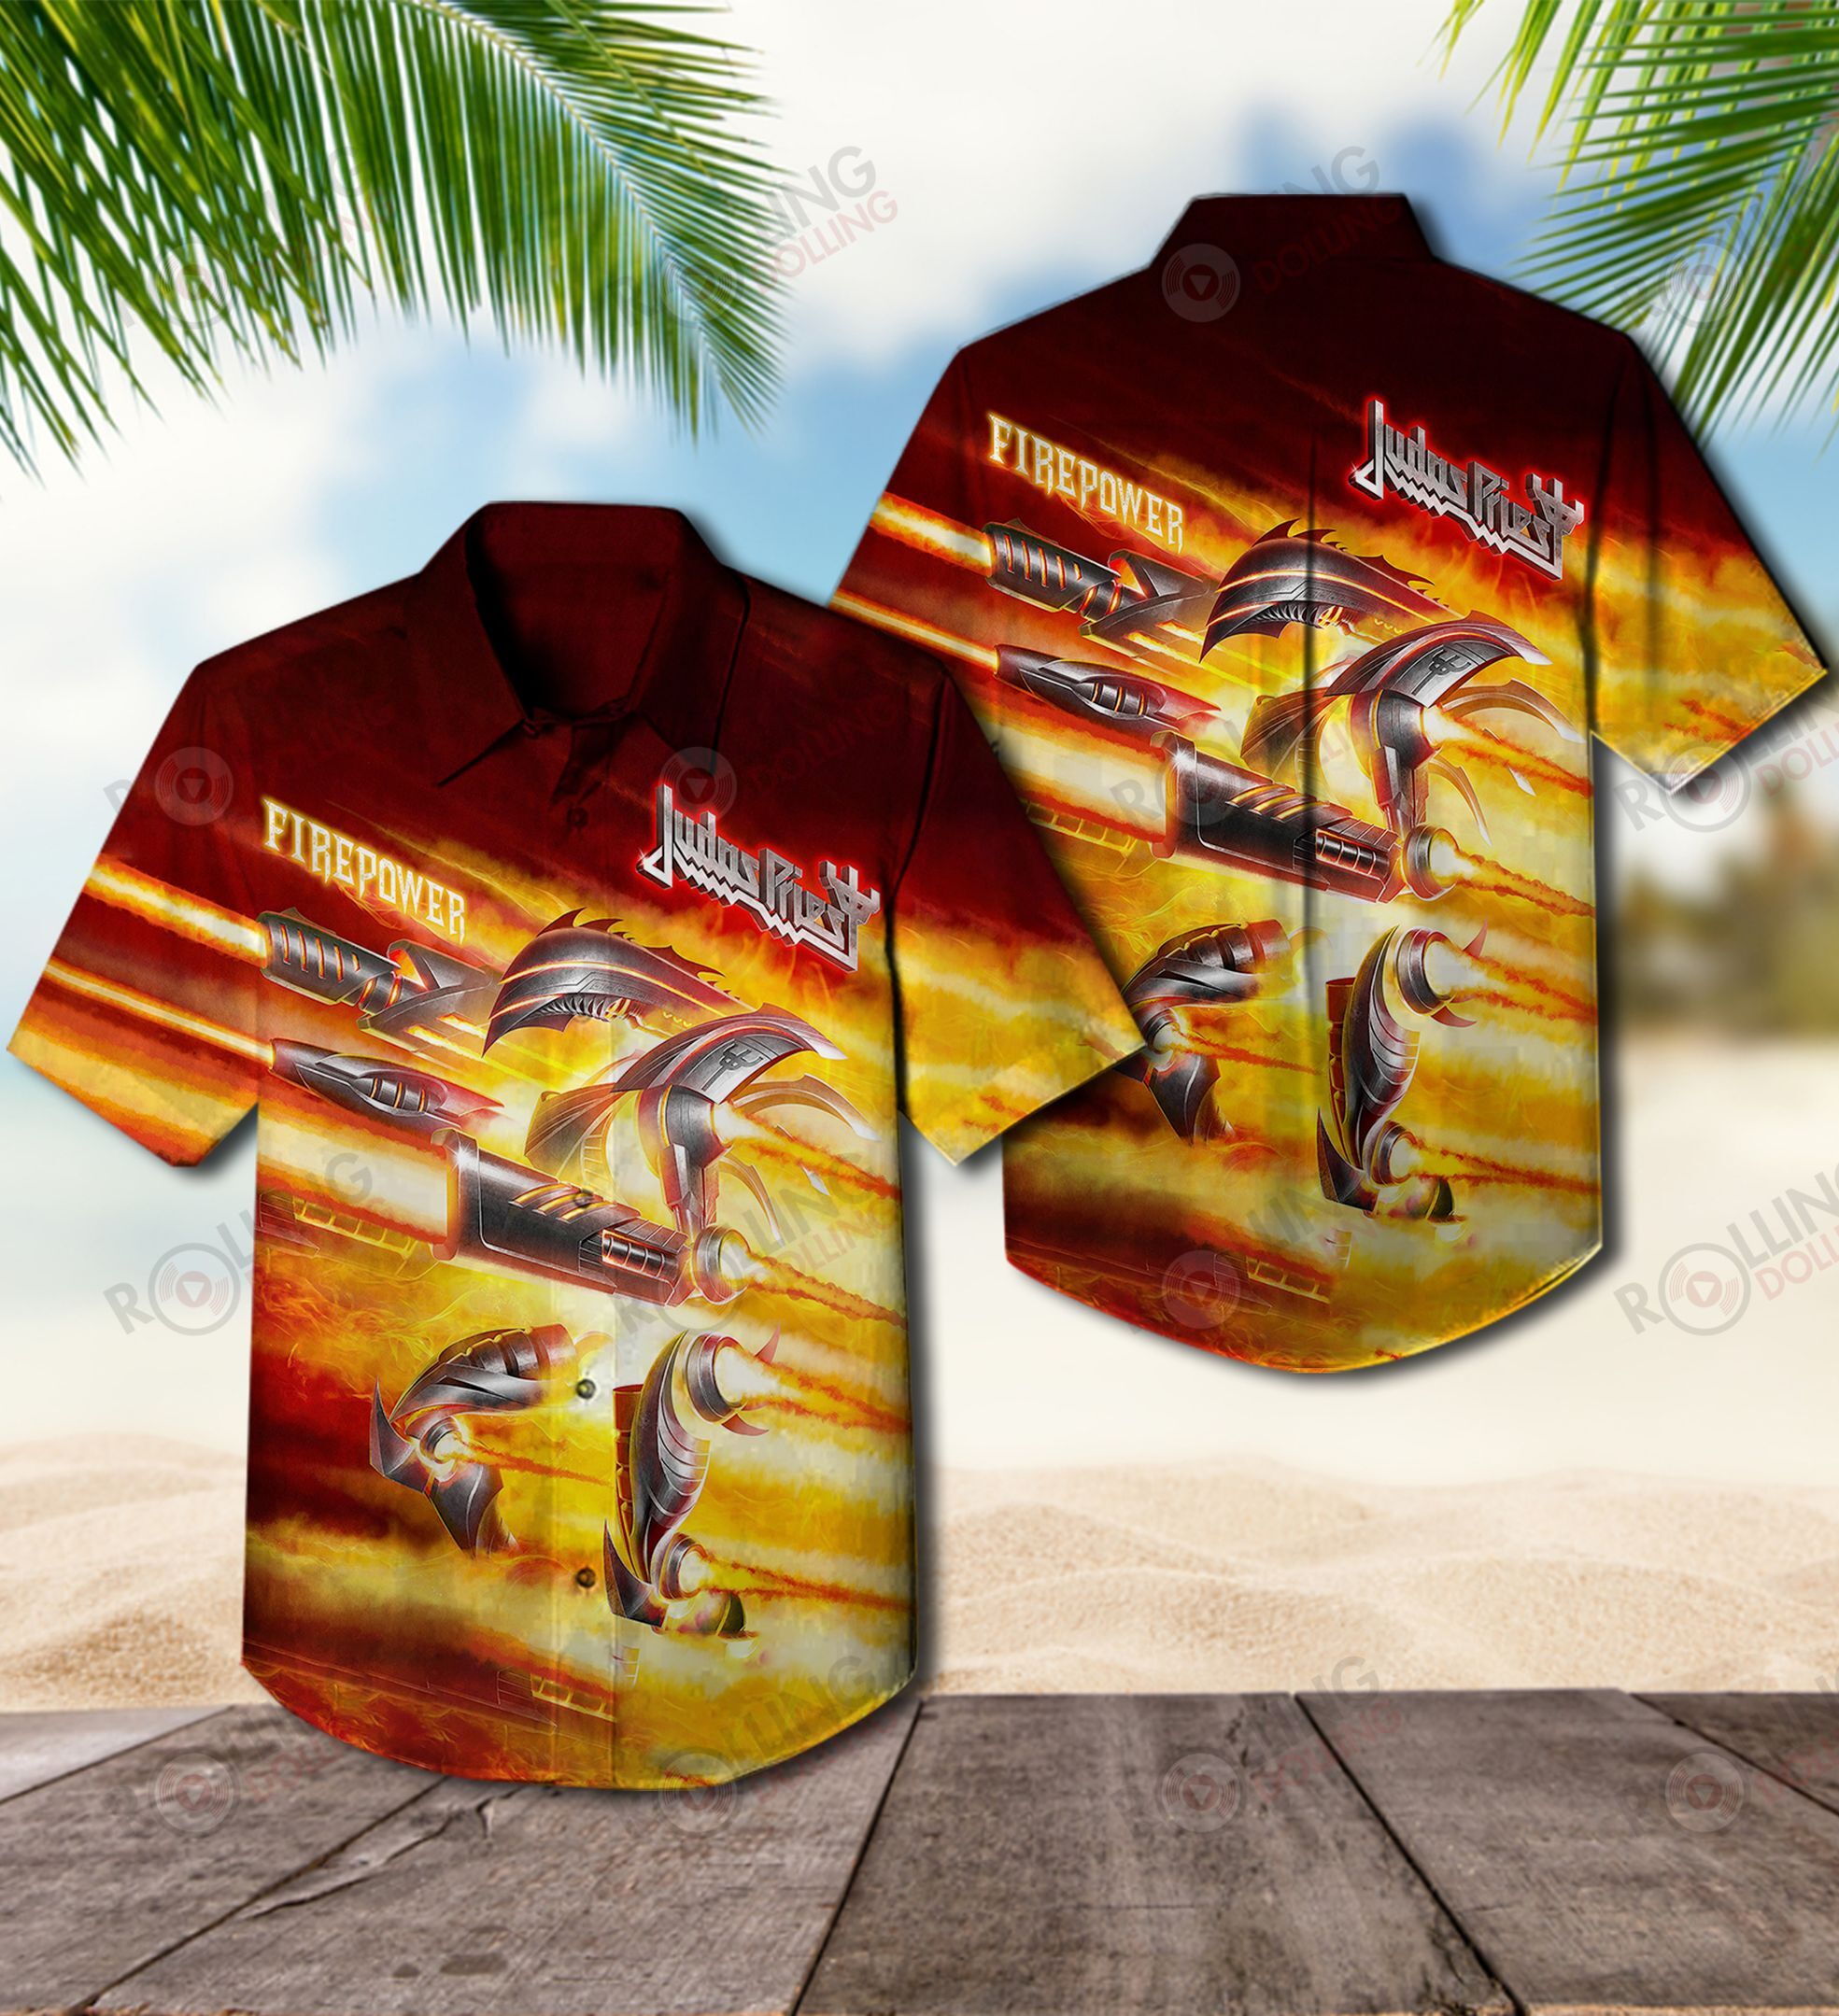 For summer, consider wearing This Amazing Hawaiian Shirt shirt in our store 99